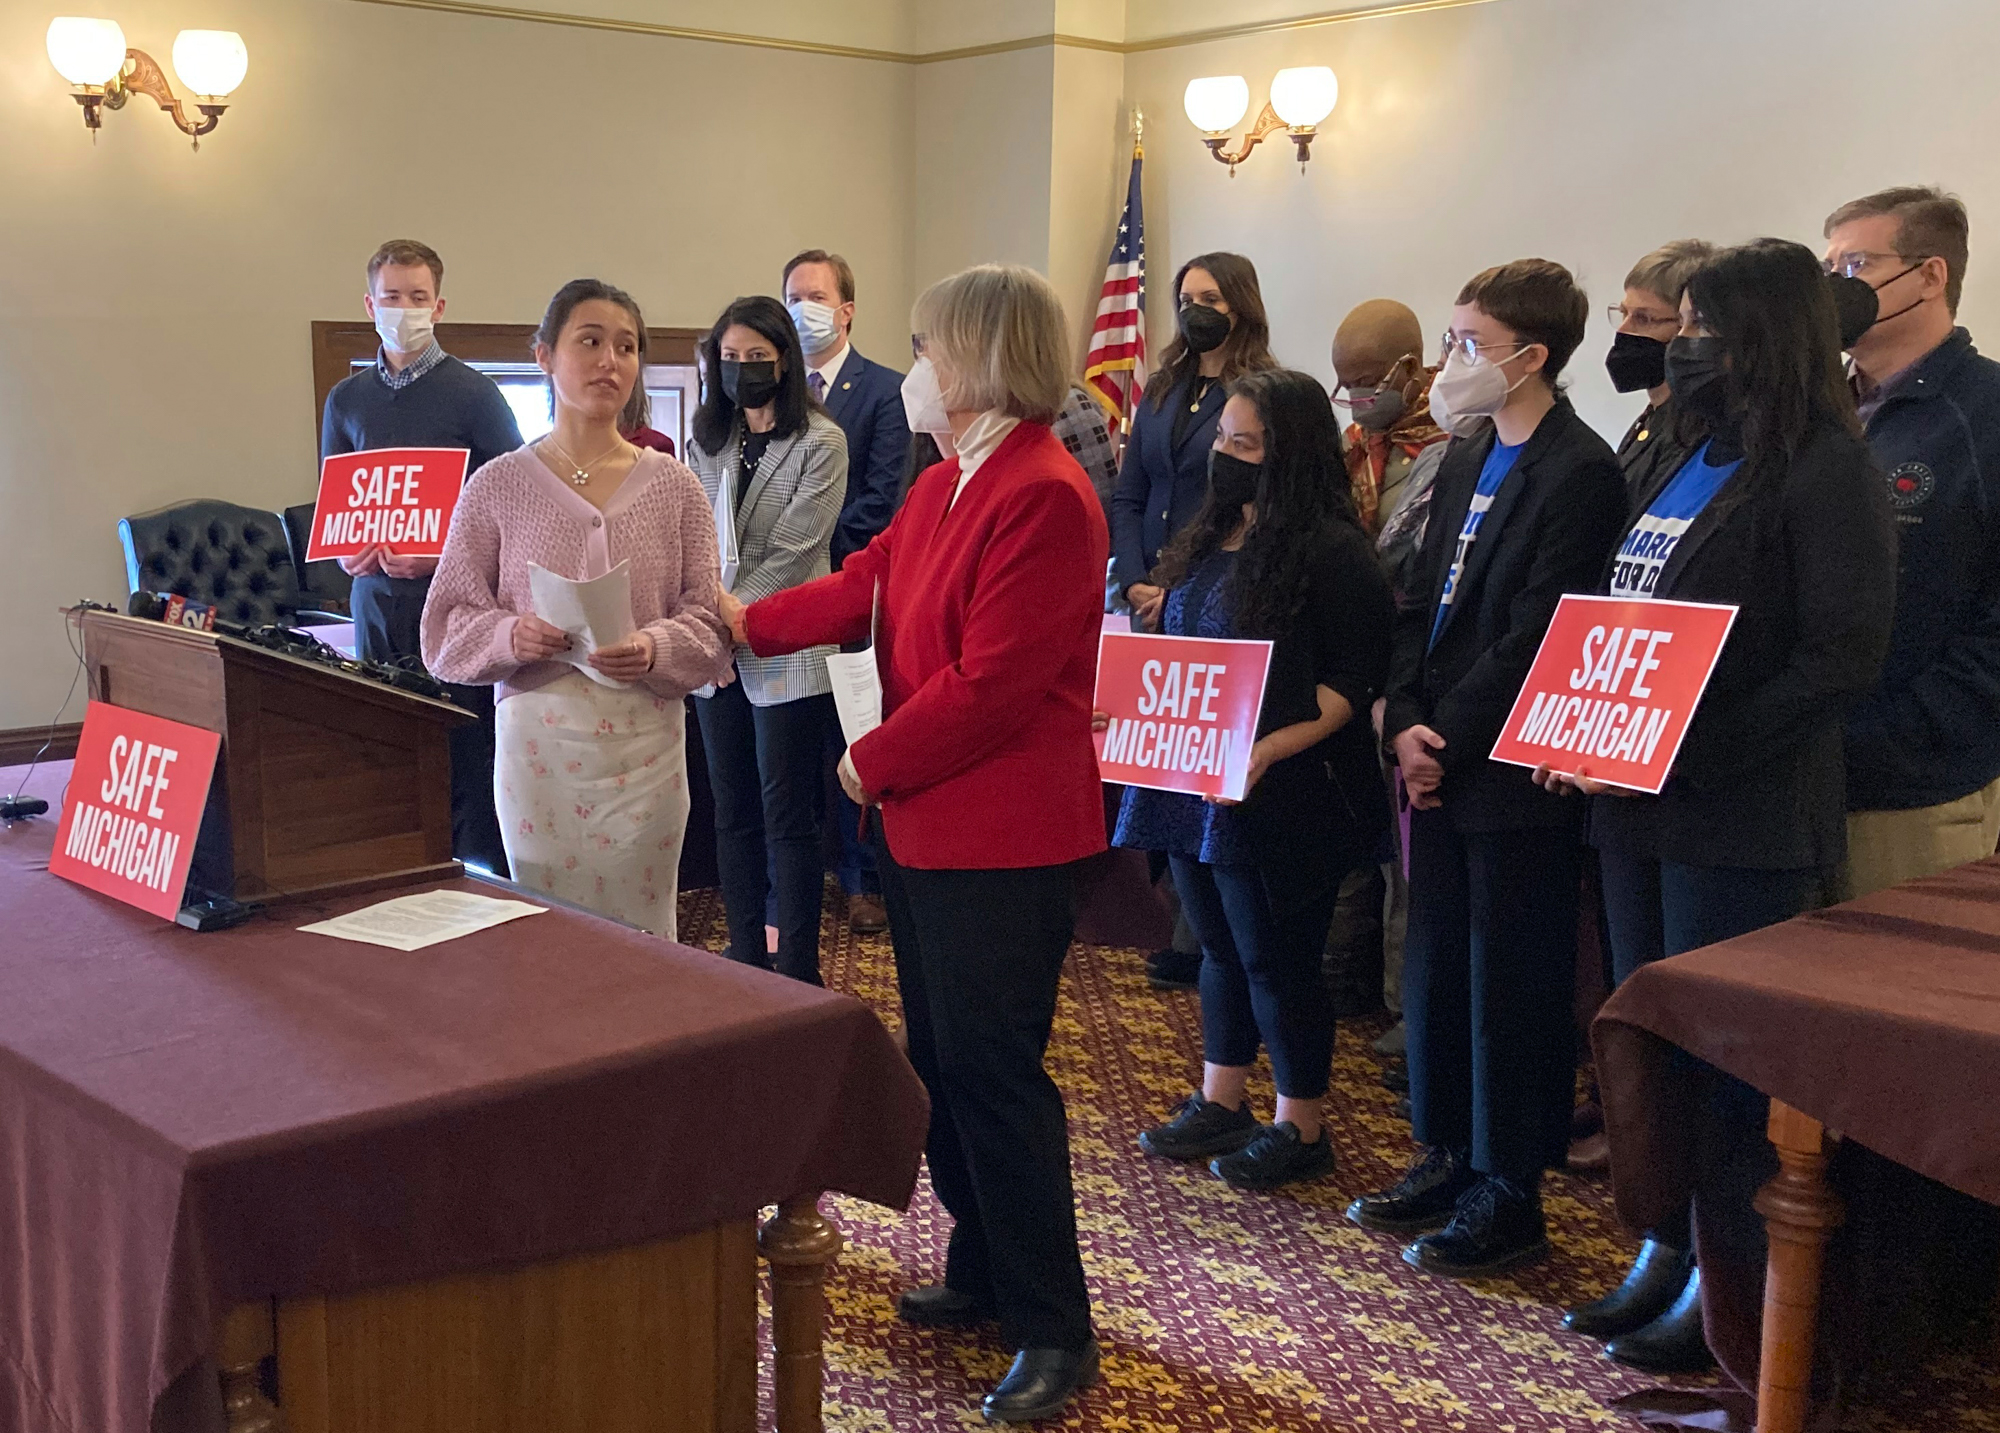 Reina St. Juliana, a student at Oxford High School, thanks Sen. Rosemary Bayer, front right, for sponsoring a bill for safe gun storage, during a news conference Feb. 15, 2022, in the state Capitol in Lansing, Mich. Reina's sister, Hana, was killed in a mass shooting at the school.